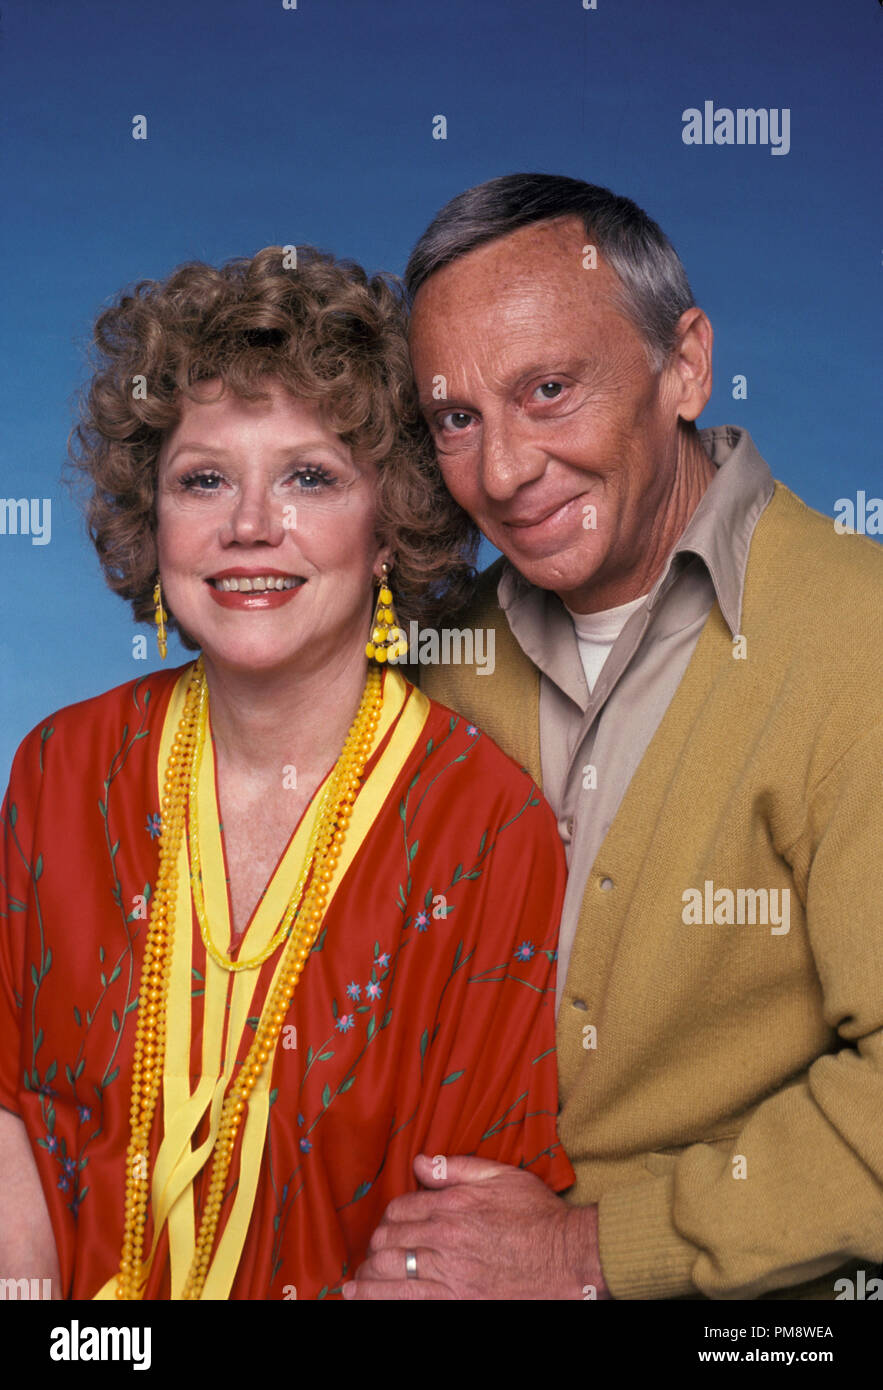 Studio Publicity Still from 'The Ropers' Audra Lindley, Norman Fell  1979 All Rights Reserved   File Reference # 31718031THA  For Editorial Use Only Stock Photo